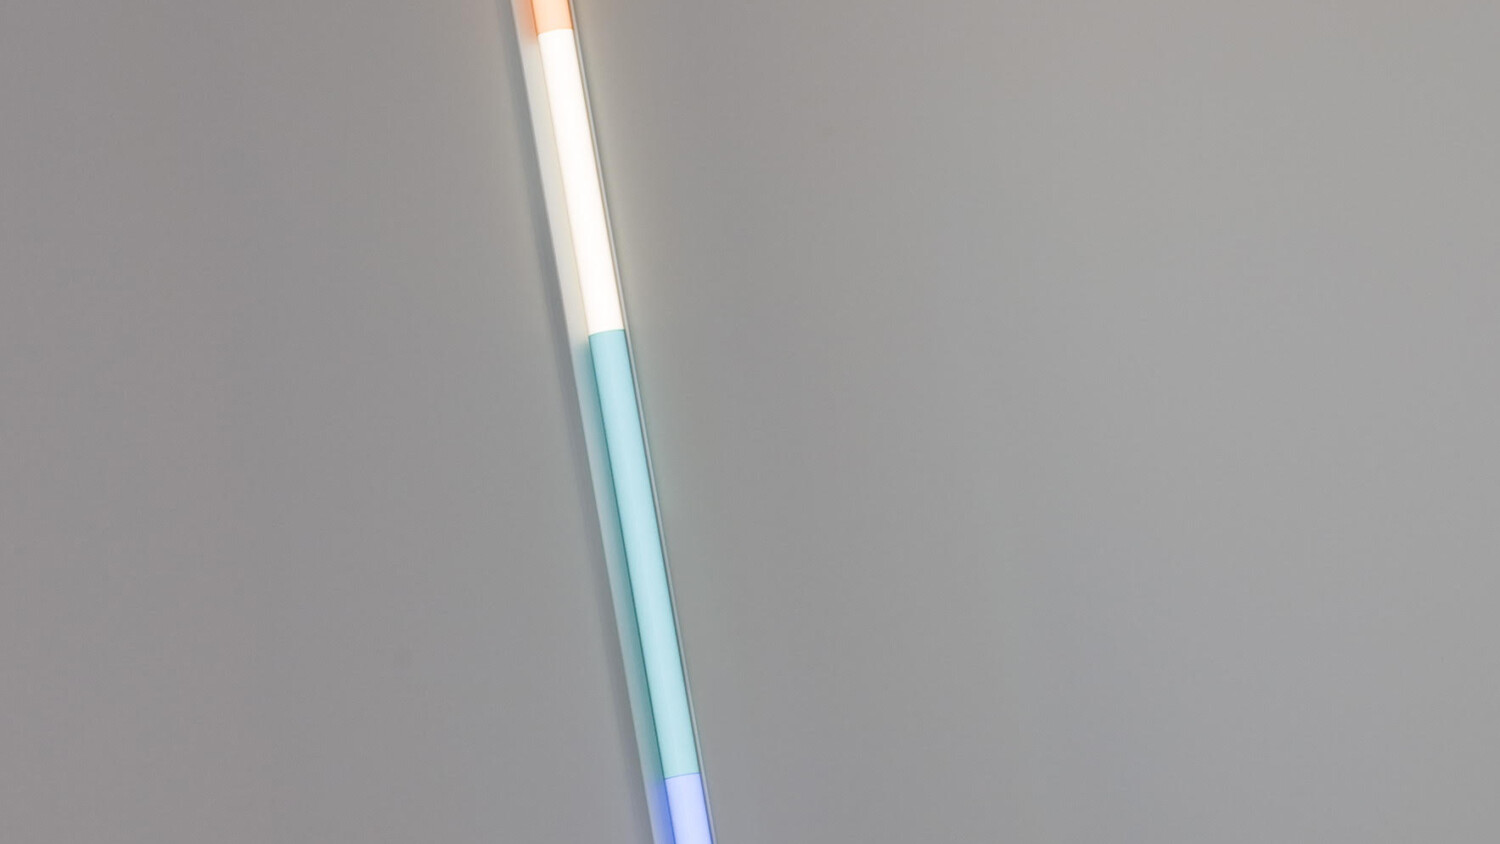 a sculpture consisting of a tube shaped light with sections corresponding to each color in roygbiv